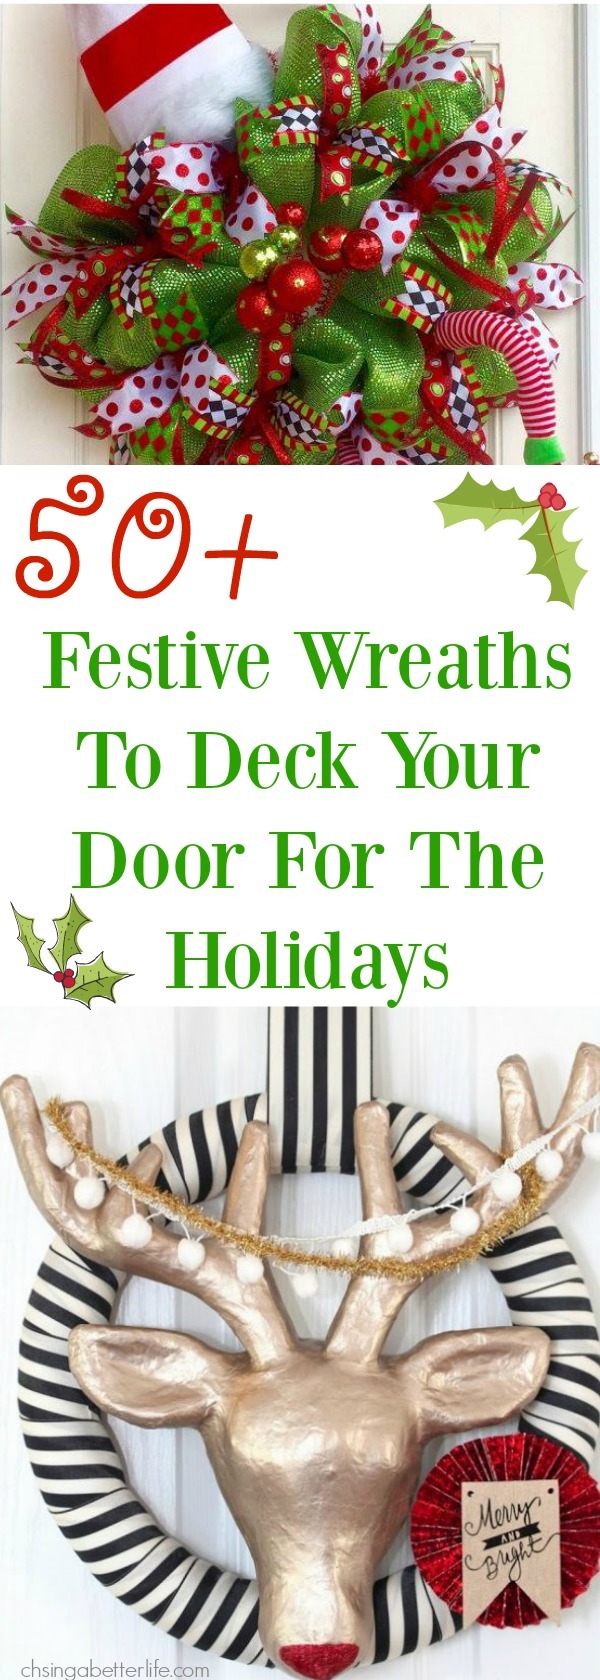 50+ Festive Wreaths To Deck Your Door For The Holidays 1